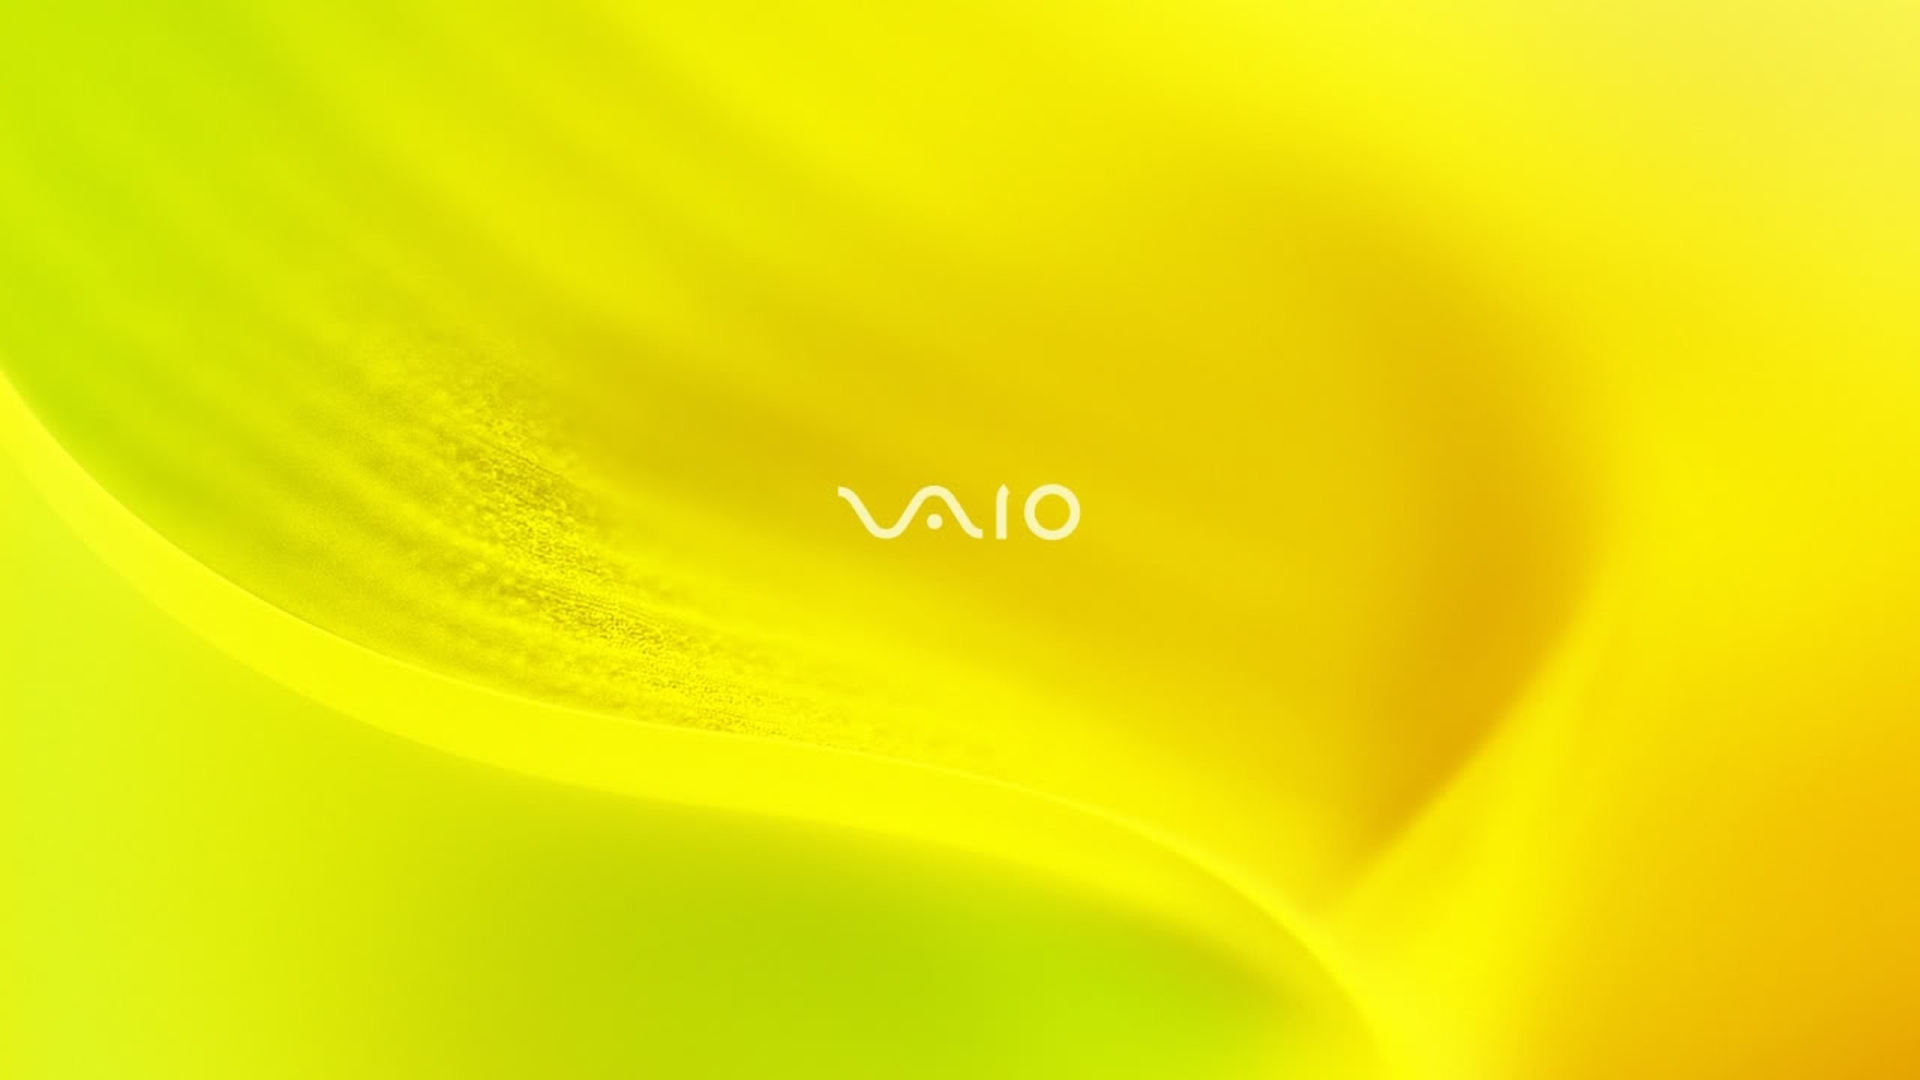 1920x1080 Sony Vaio Yellow System 1080p Laptop Full Hd Wallpaper Hd Hi Tech 4k Wallpapers Images Photos And Background